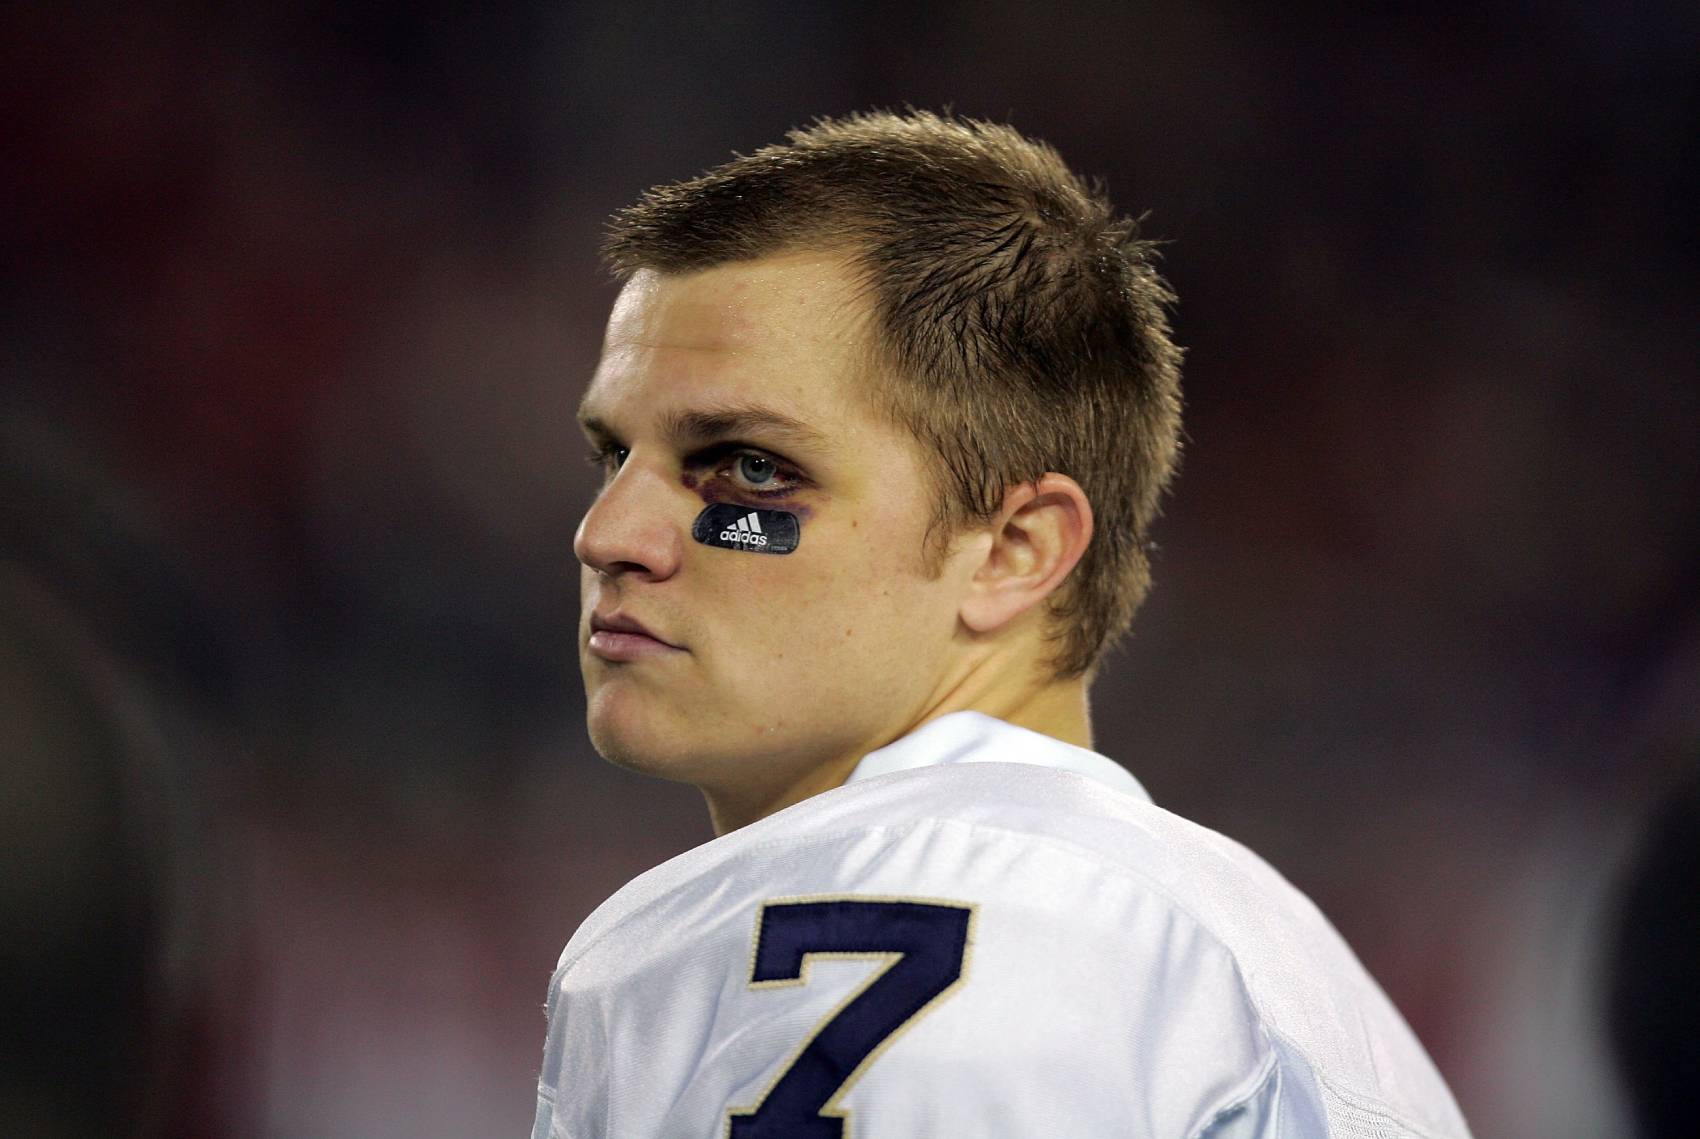 Jimmy Clausen threw 60 touchdowns in three seasons at Notre Dame and entered the league as a second-round pick.